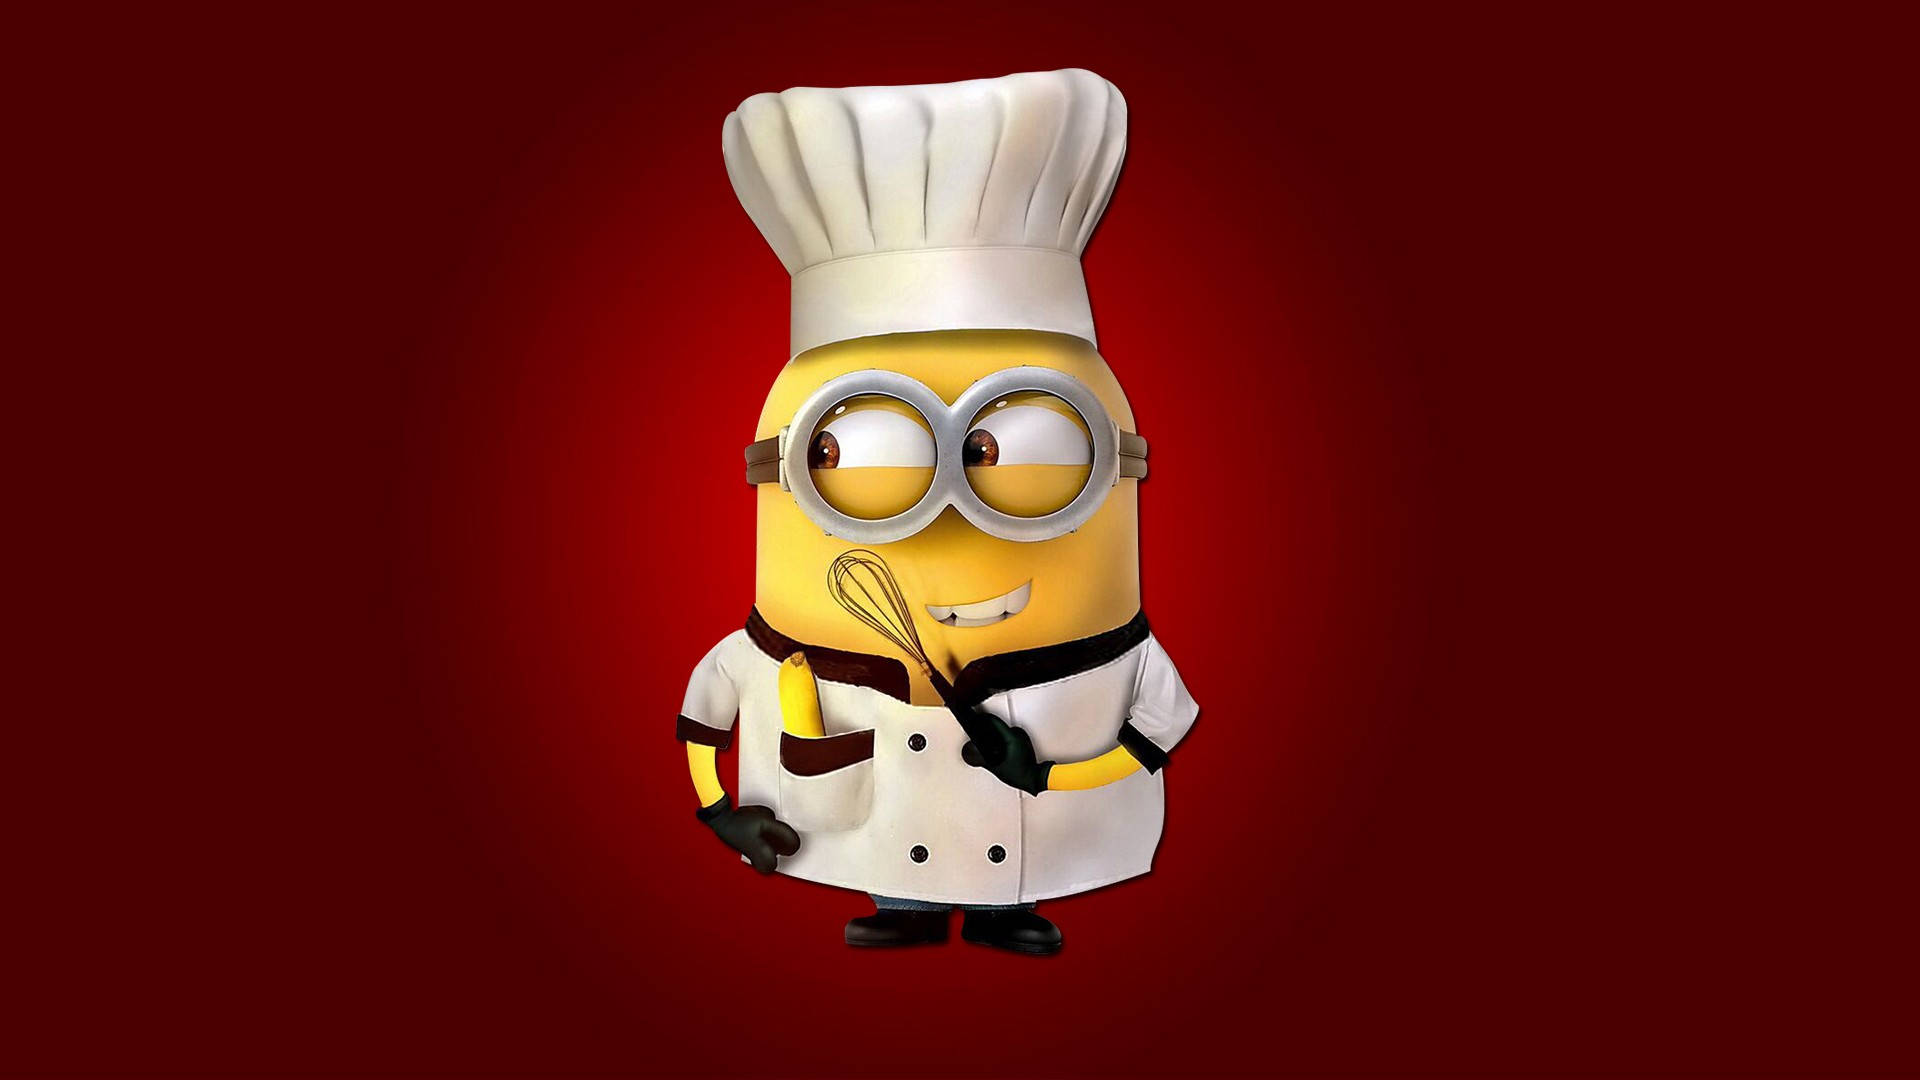 Chef Minion In Red Background